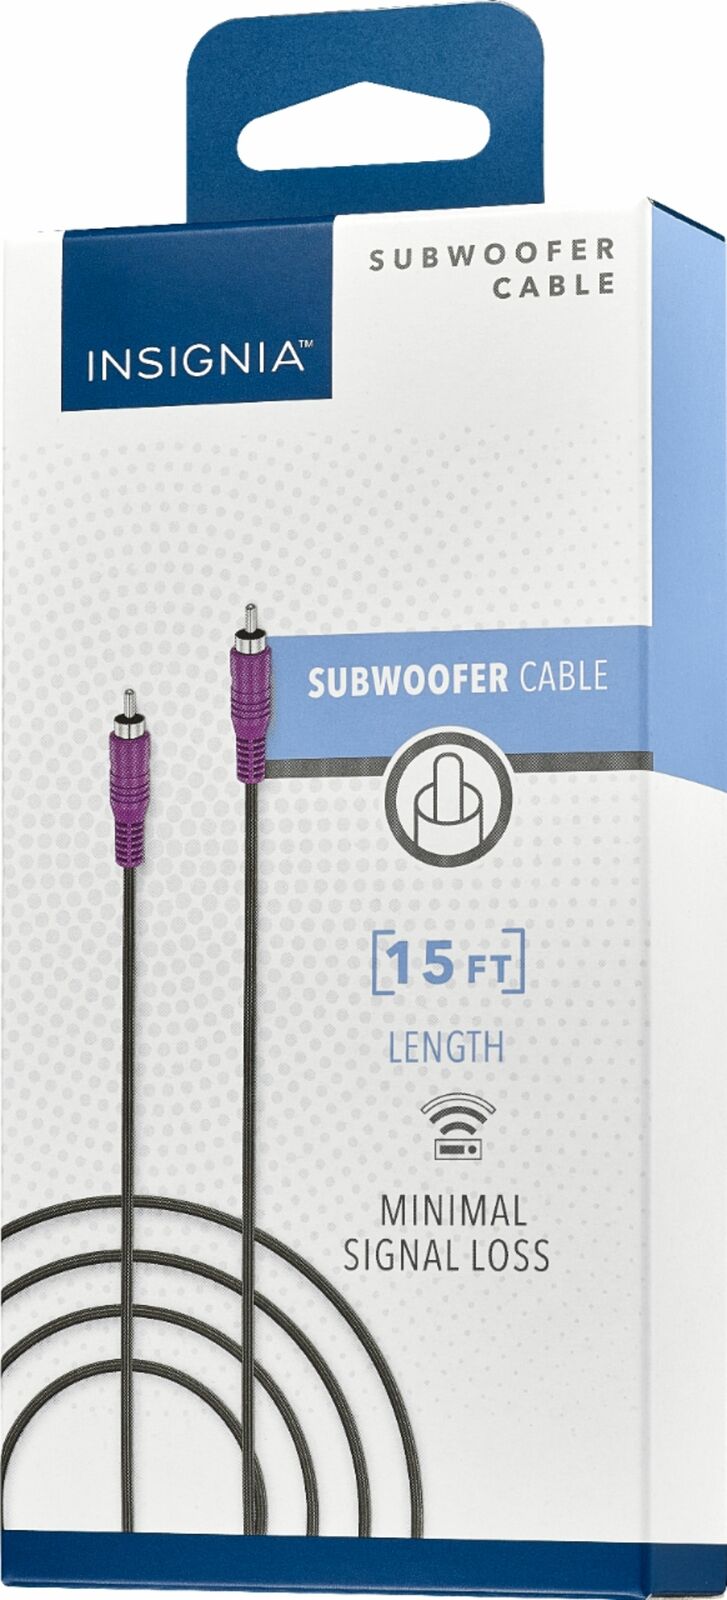 Insignia - 15' Subwoofer Cable - Rekes Sales